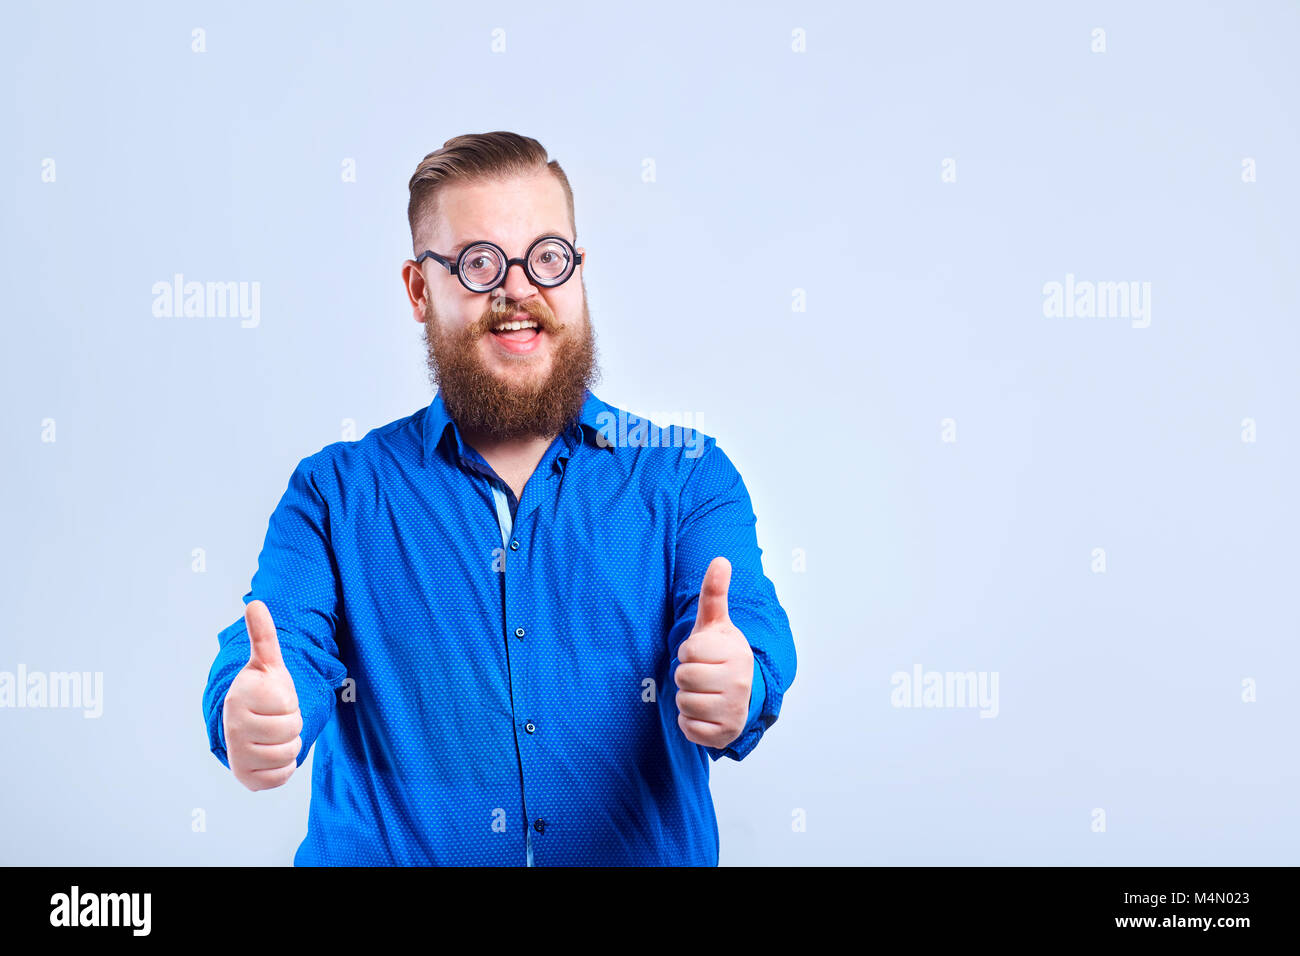 A fat, bearded man with glasses on a gray background with a posi Stock Photo